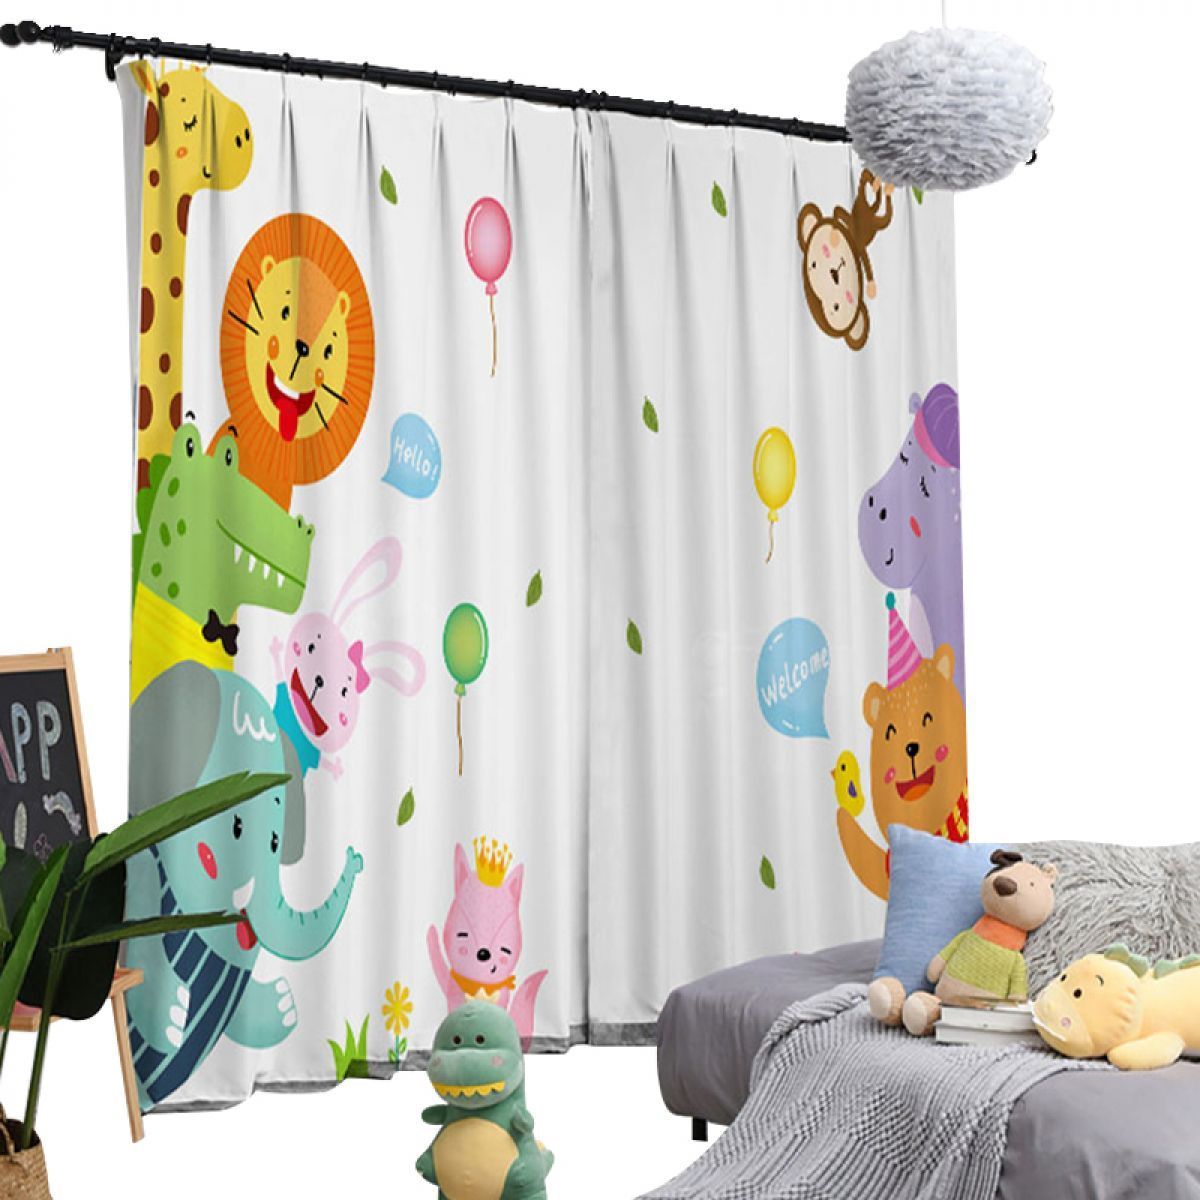 3d balloon and animals printed window curtain home decor 4268